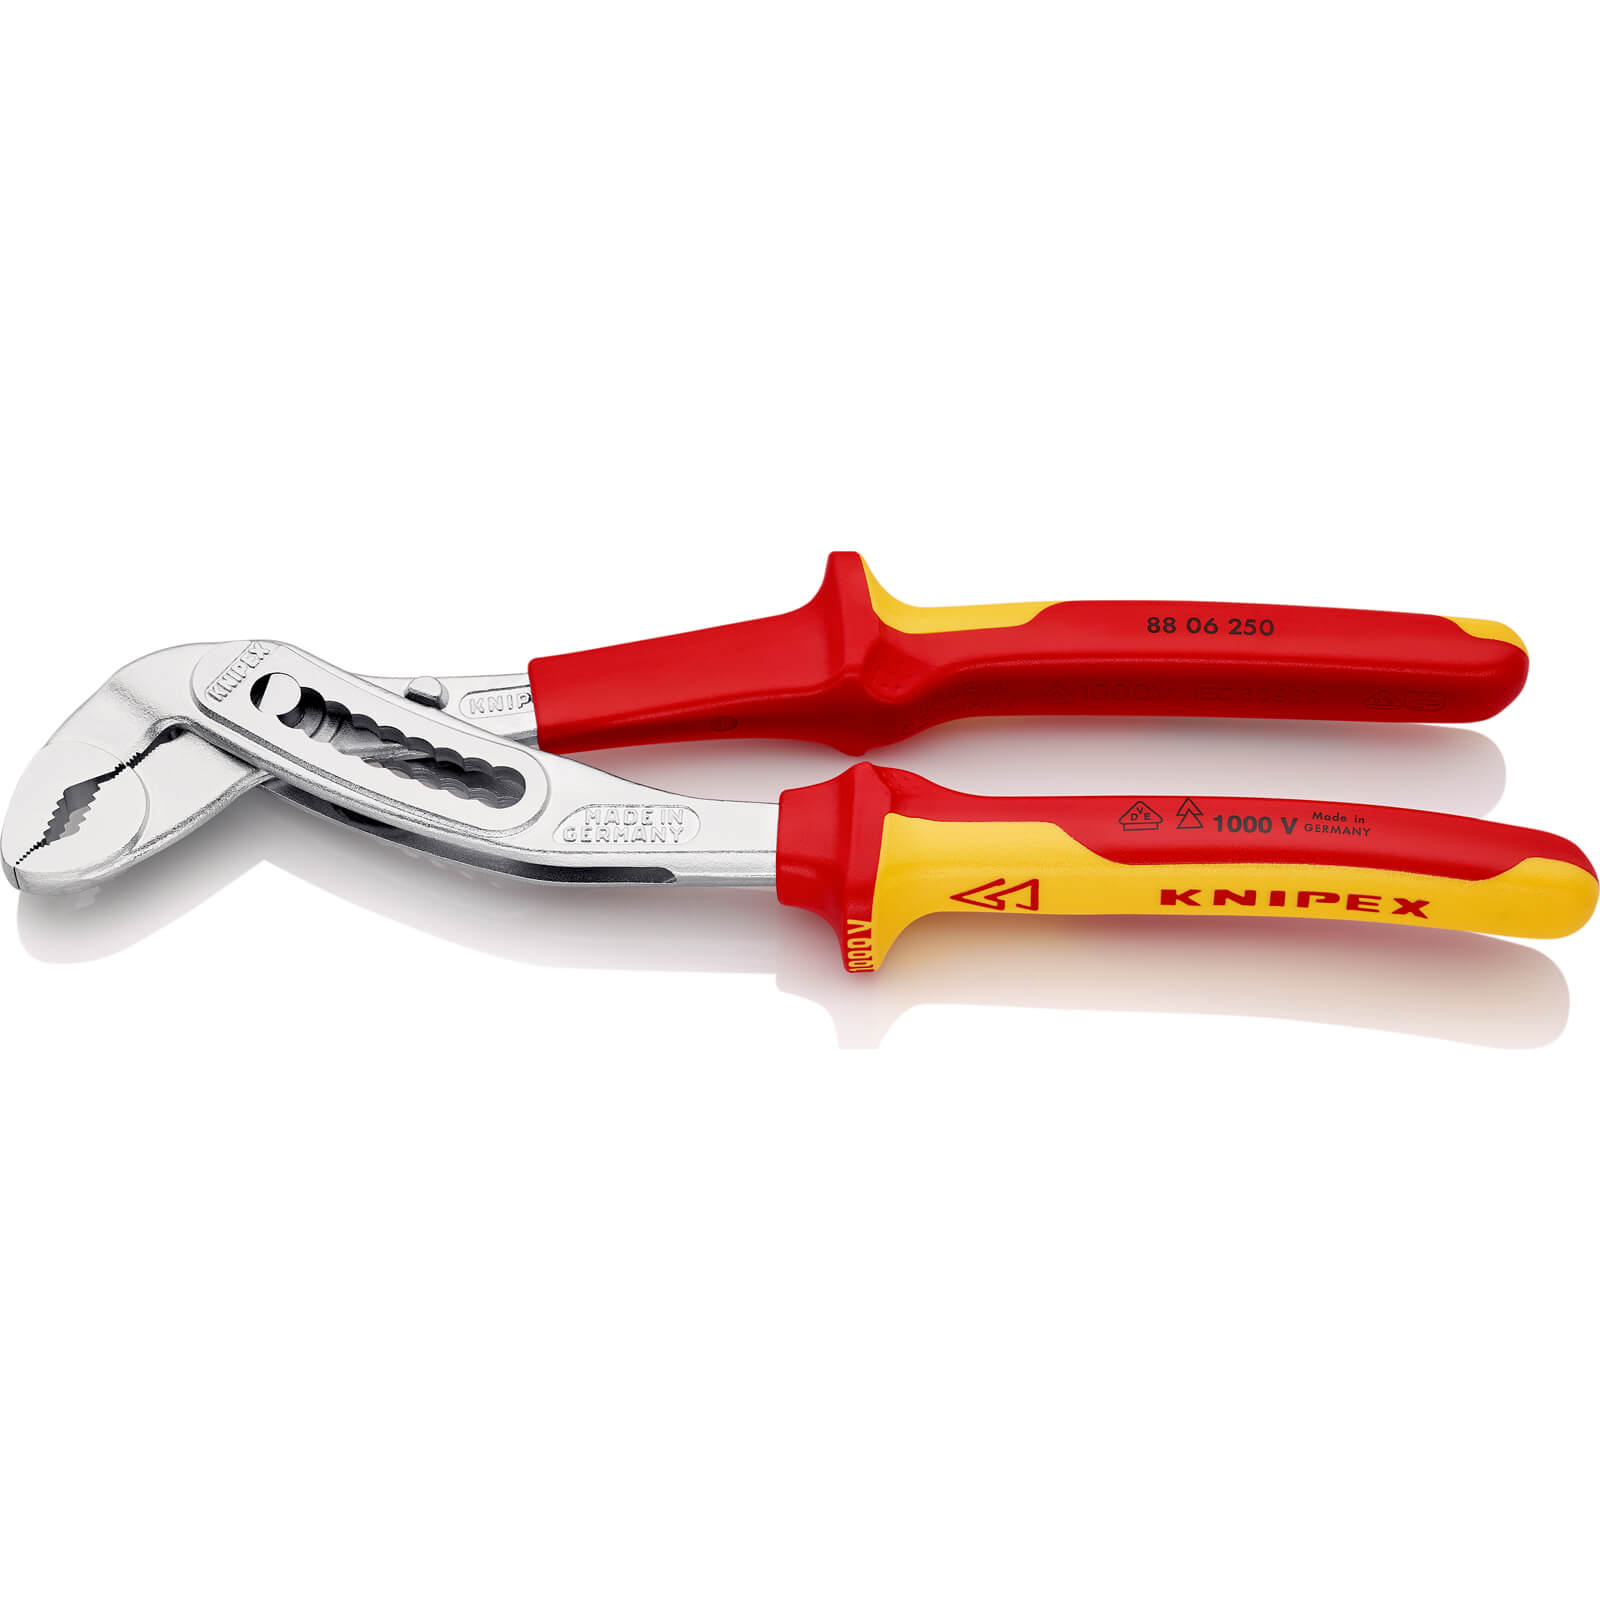 Photo of Knipex 88 06 Vde Insulated Alligator Water Pump Pliers 250mm